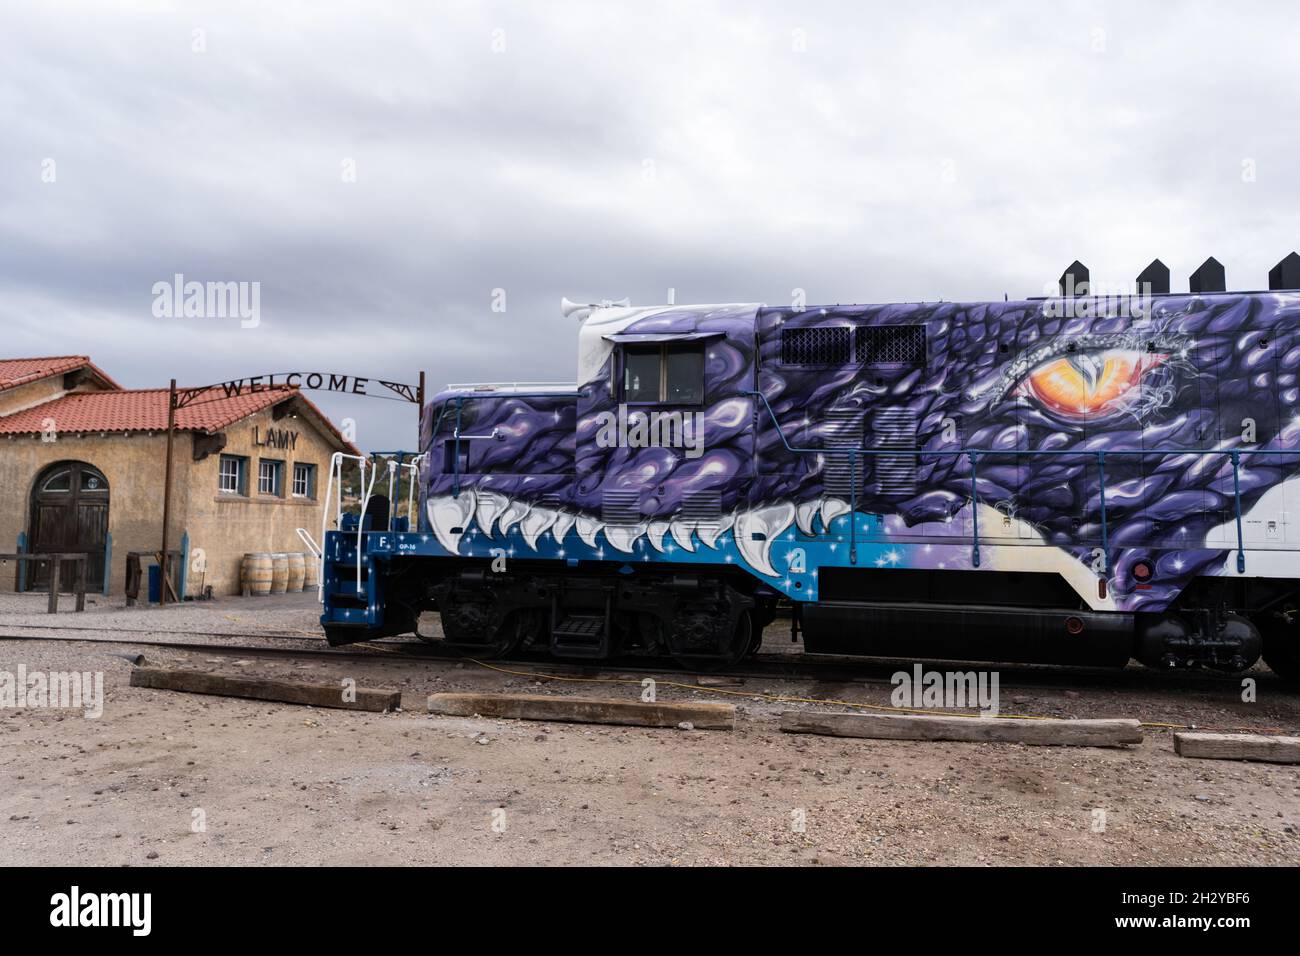 A locomotive painted top-to-bottom with “Game of Thrones” dragon art sits at the Lamy Amtrak station in Lamy, New Mexico, just south of Santa Fe. The Stock Photo